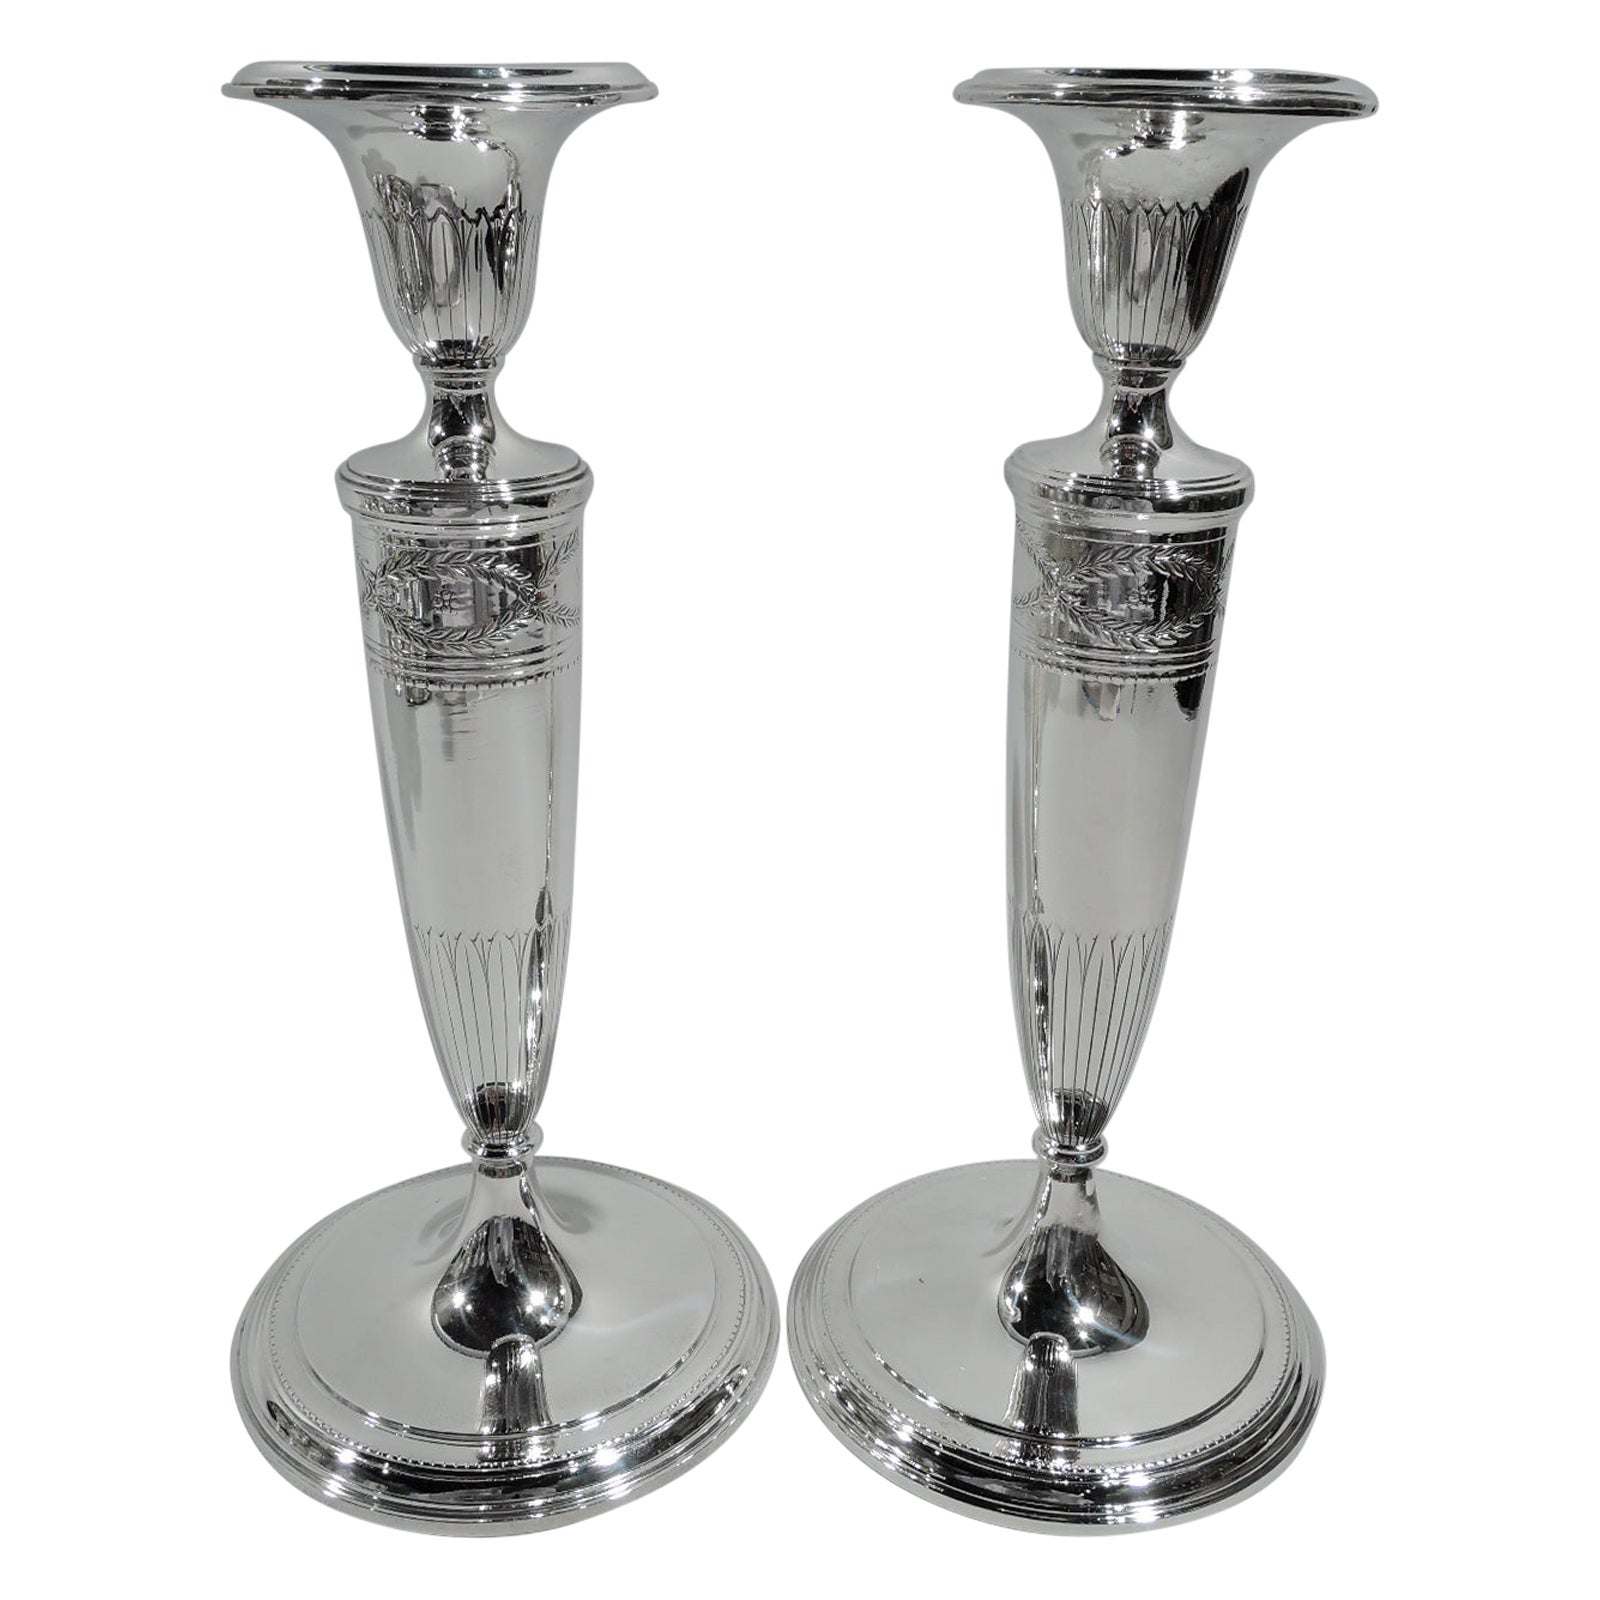 Pair of Antique Tiffany Winthrop Sterling Silver Candlesticks